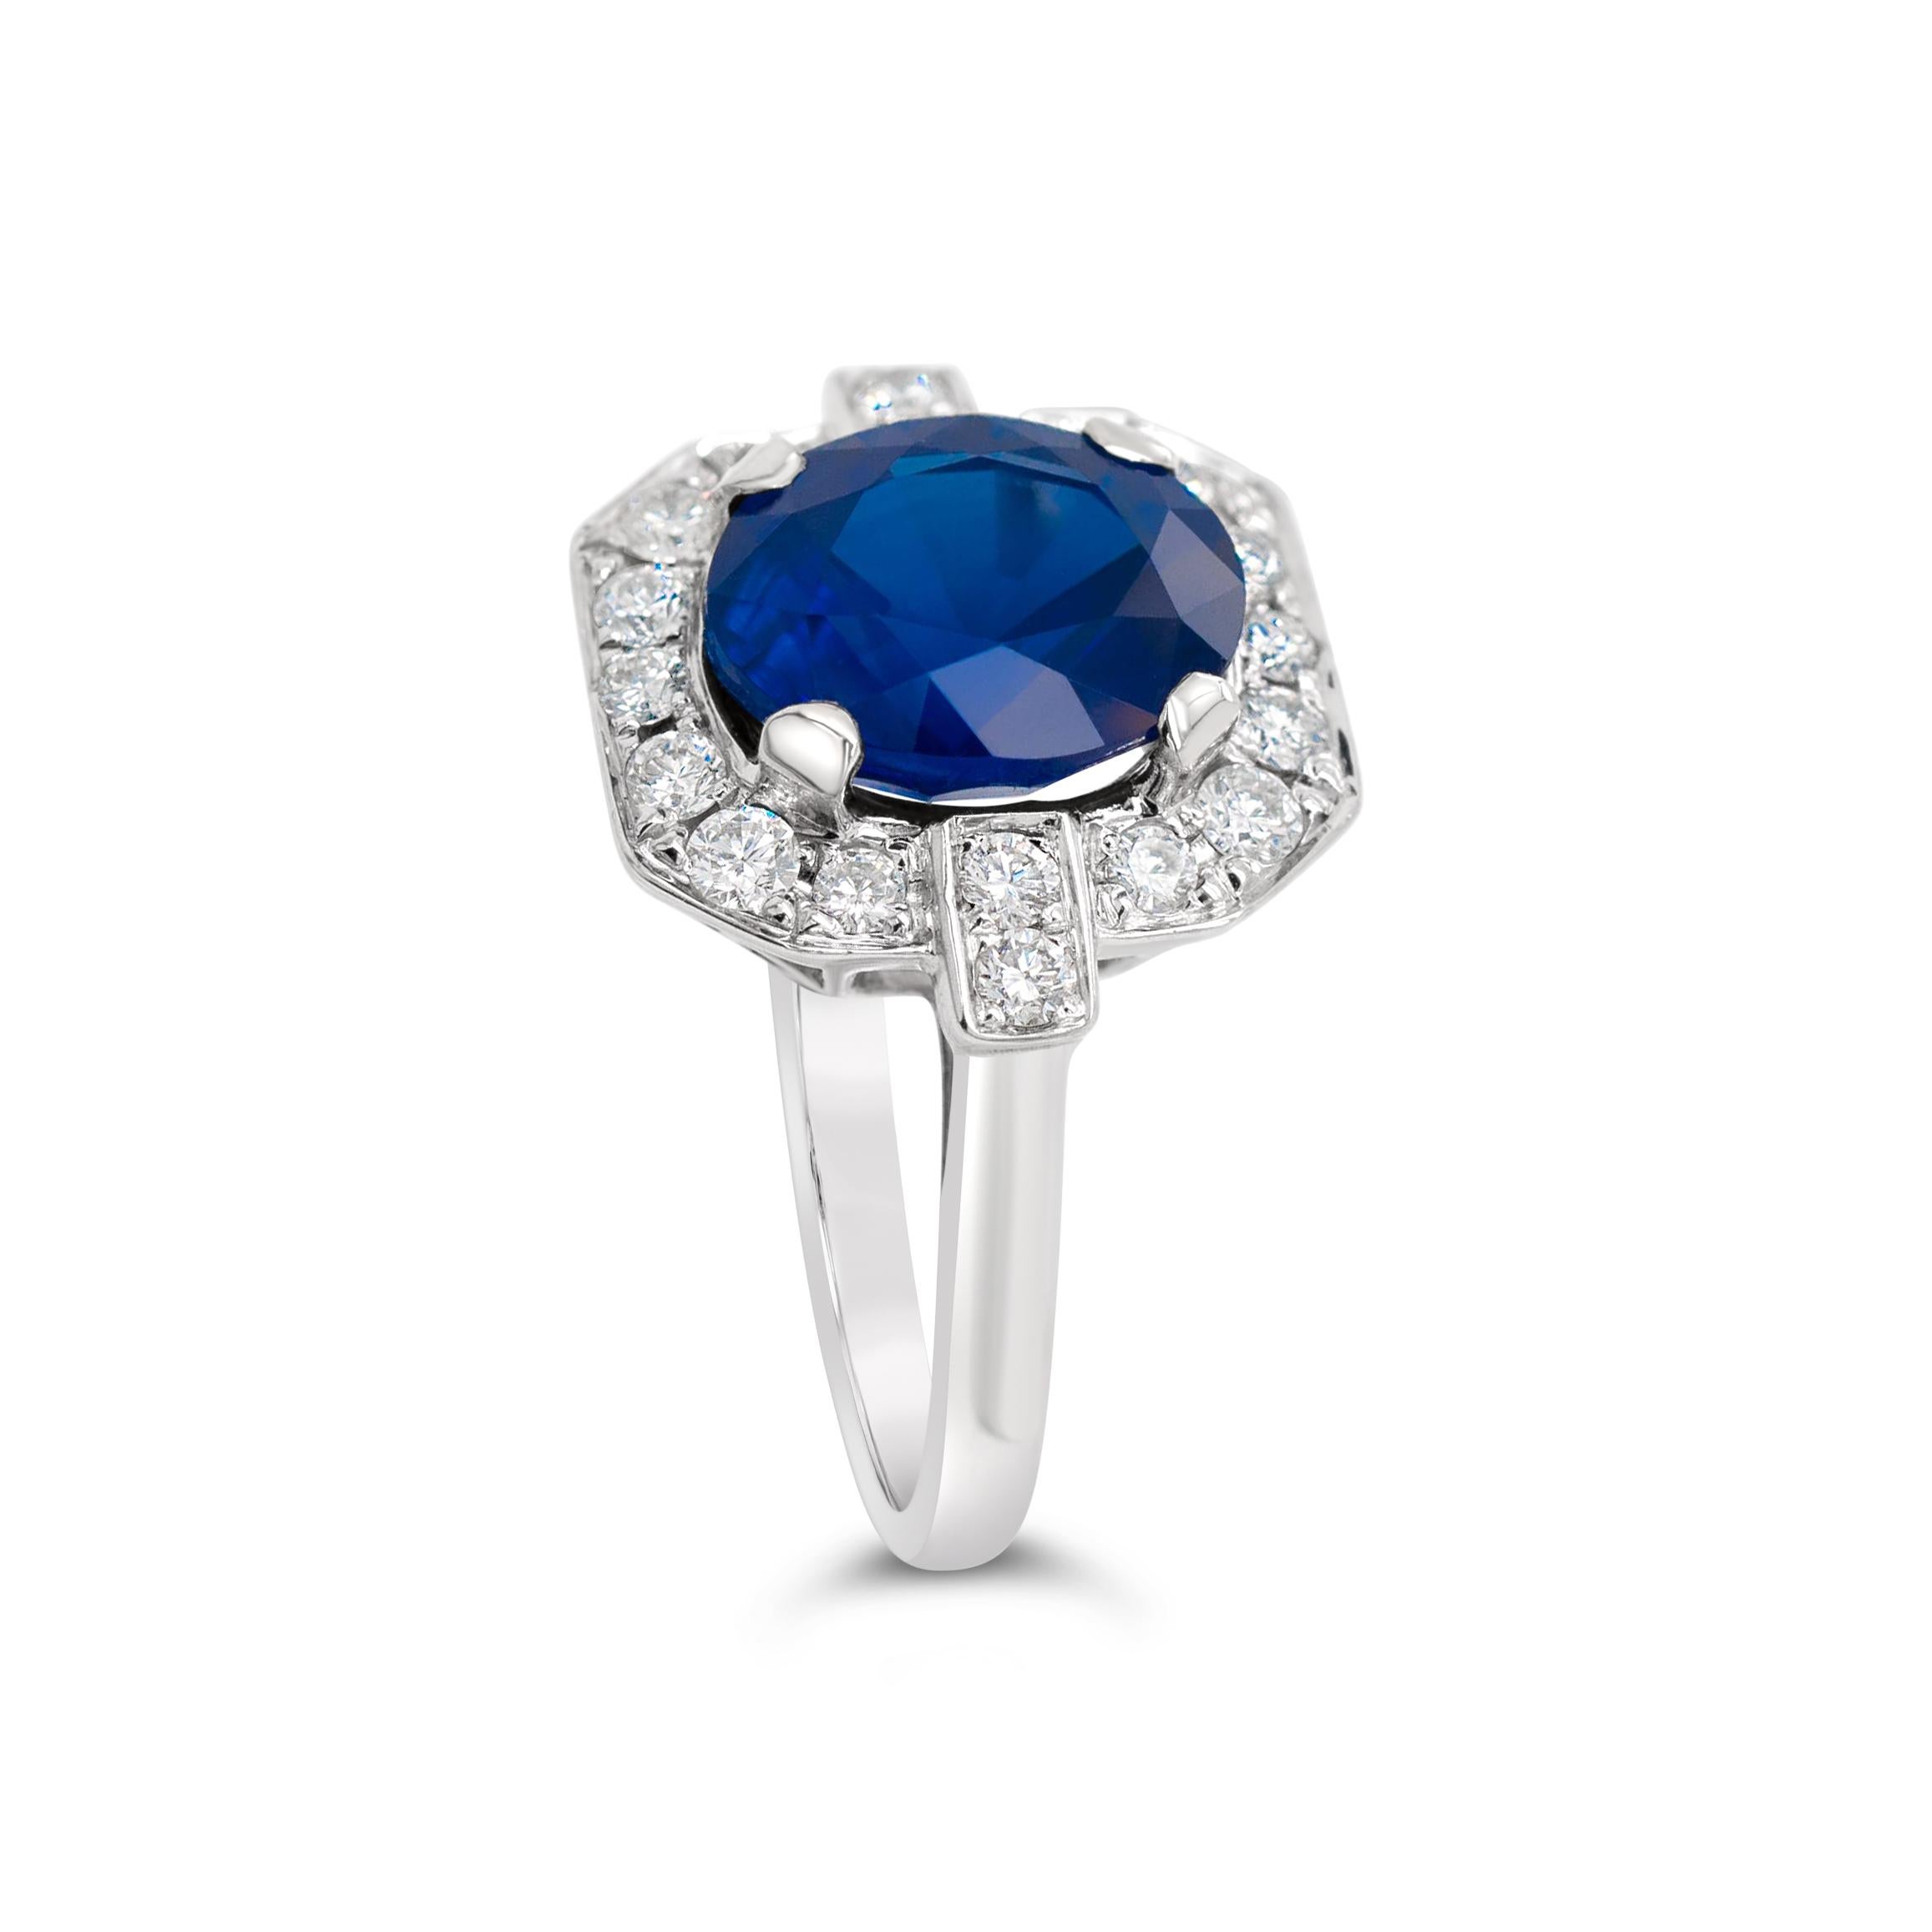 4,04ct Certified Oval Royal Blue Sapphire & 0,45ct Diamond 18ct White Gold Ring (Ovalschliff) im Angebot